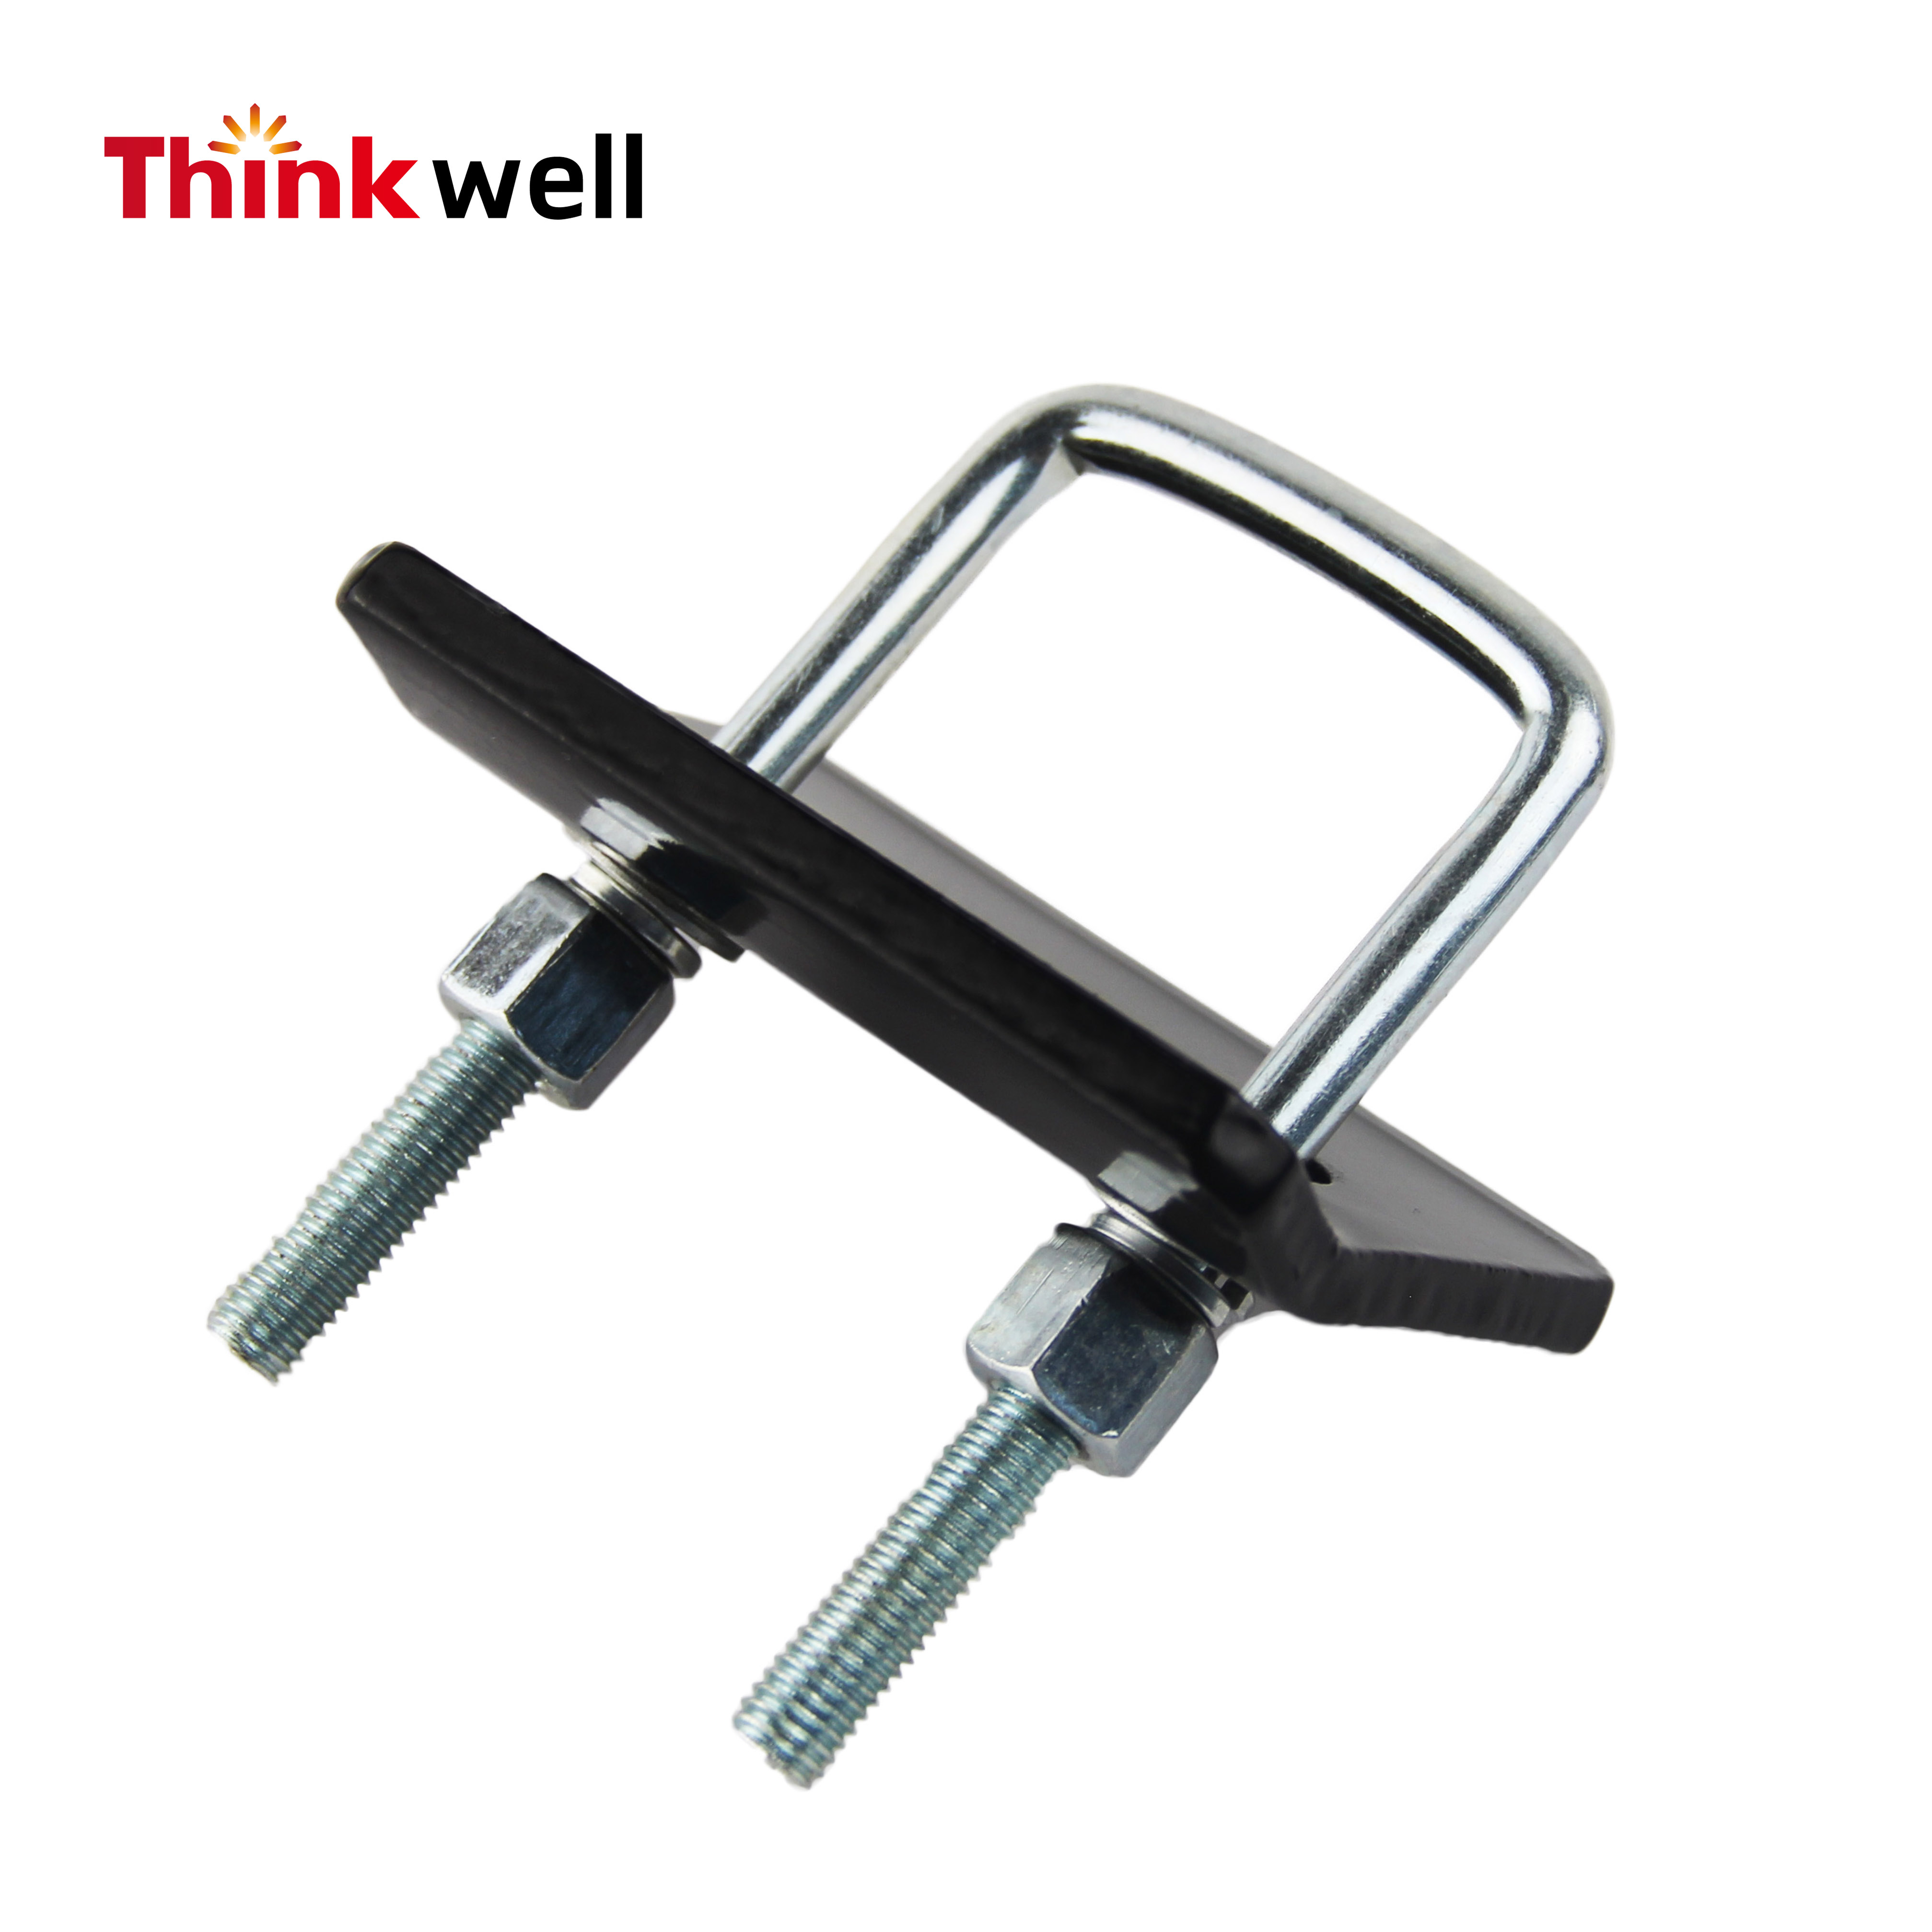 Boat Trailer Tow Clamp Receiver Hitch Tightener